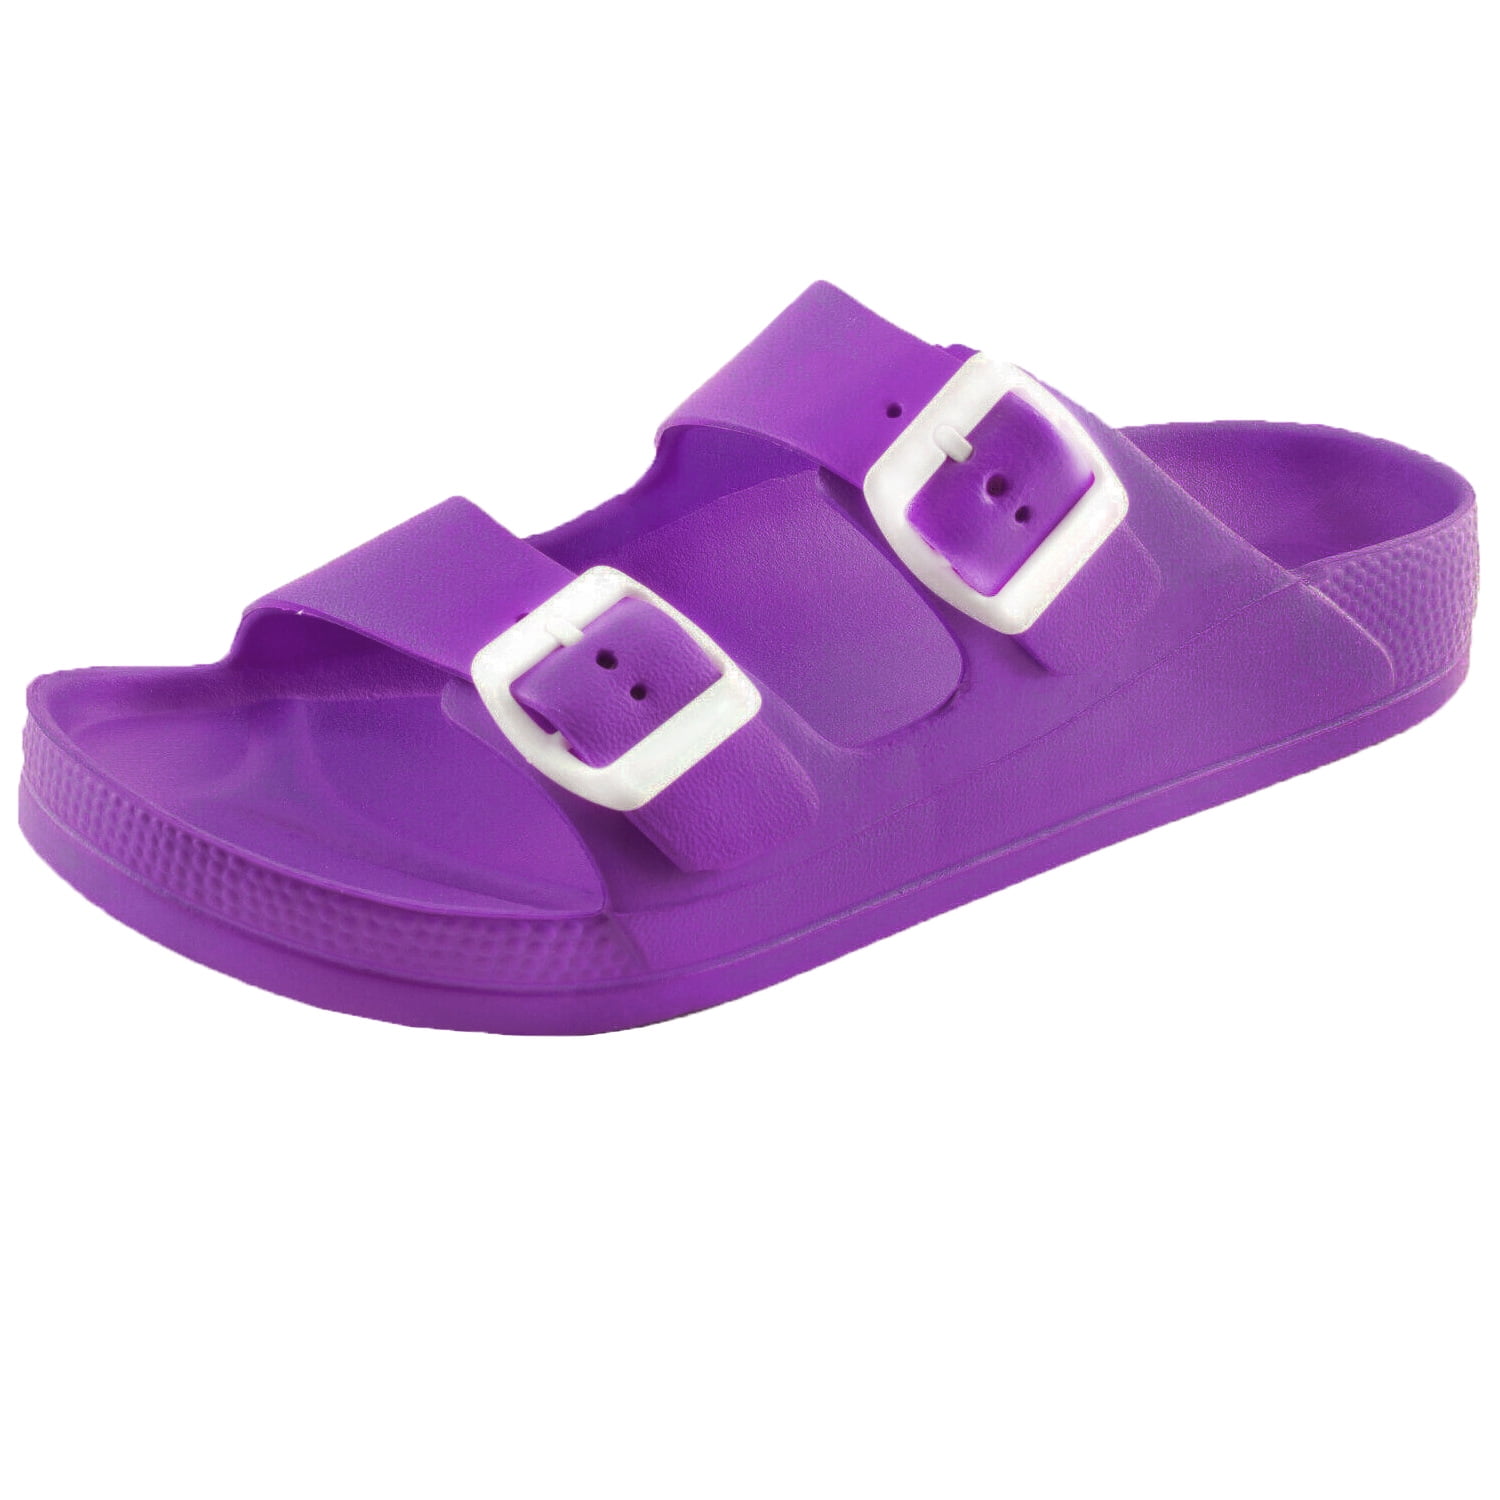 slide sandals with buckle